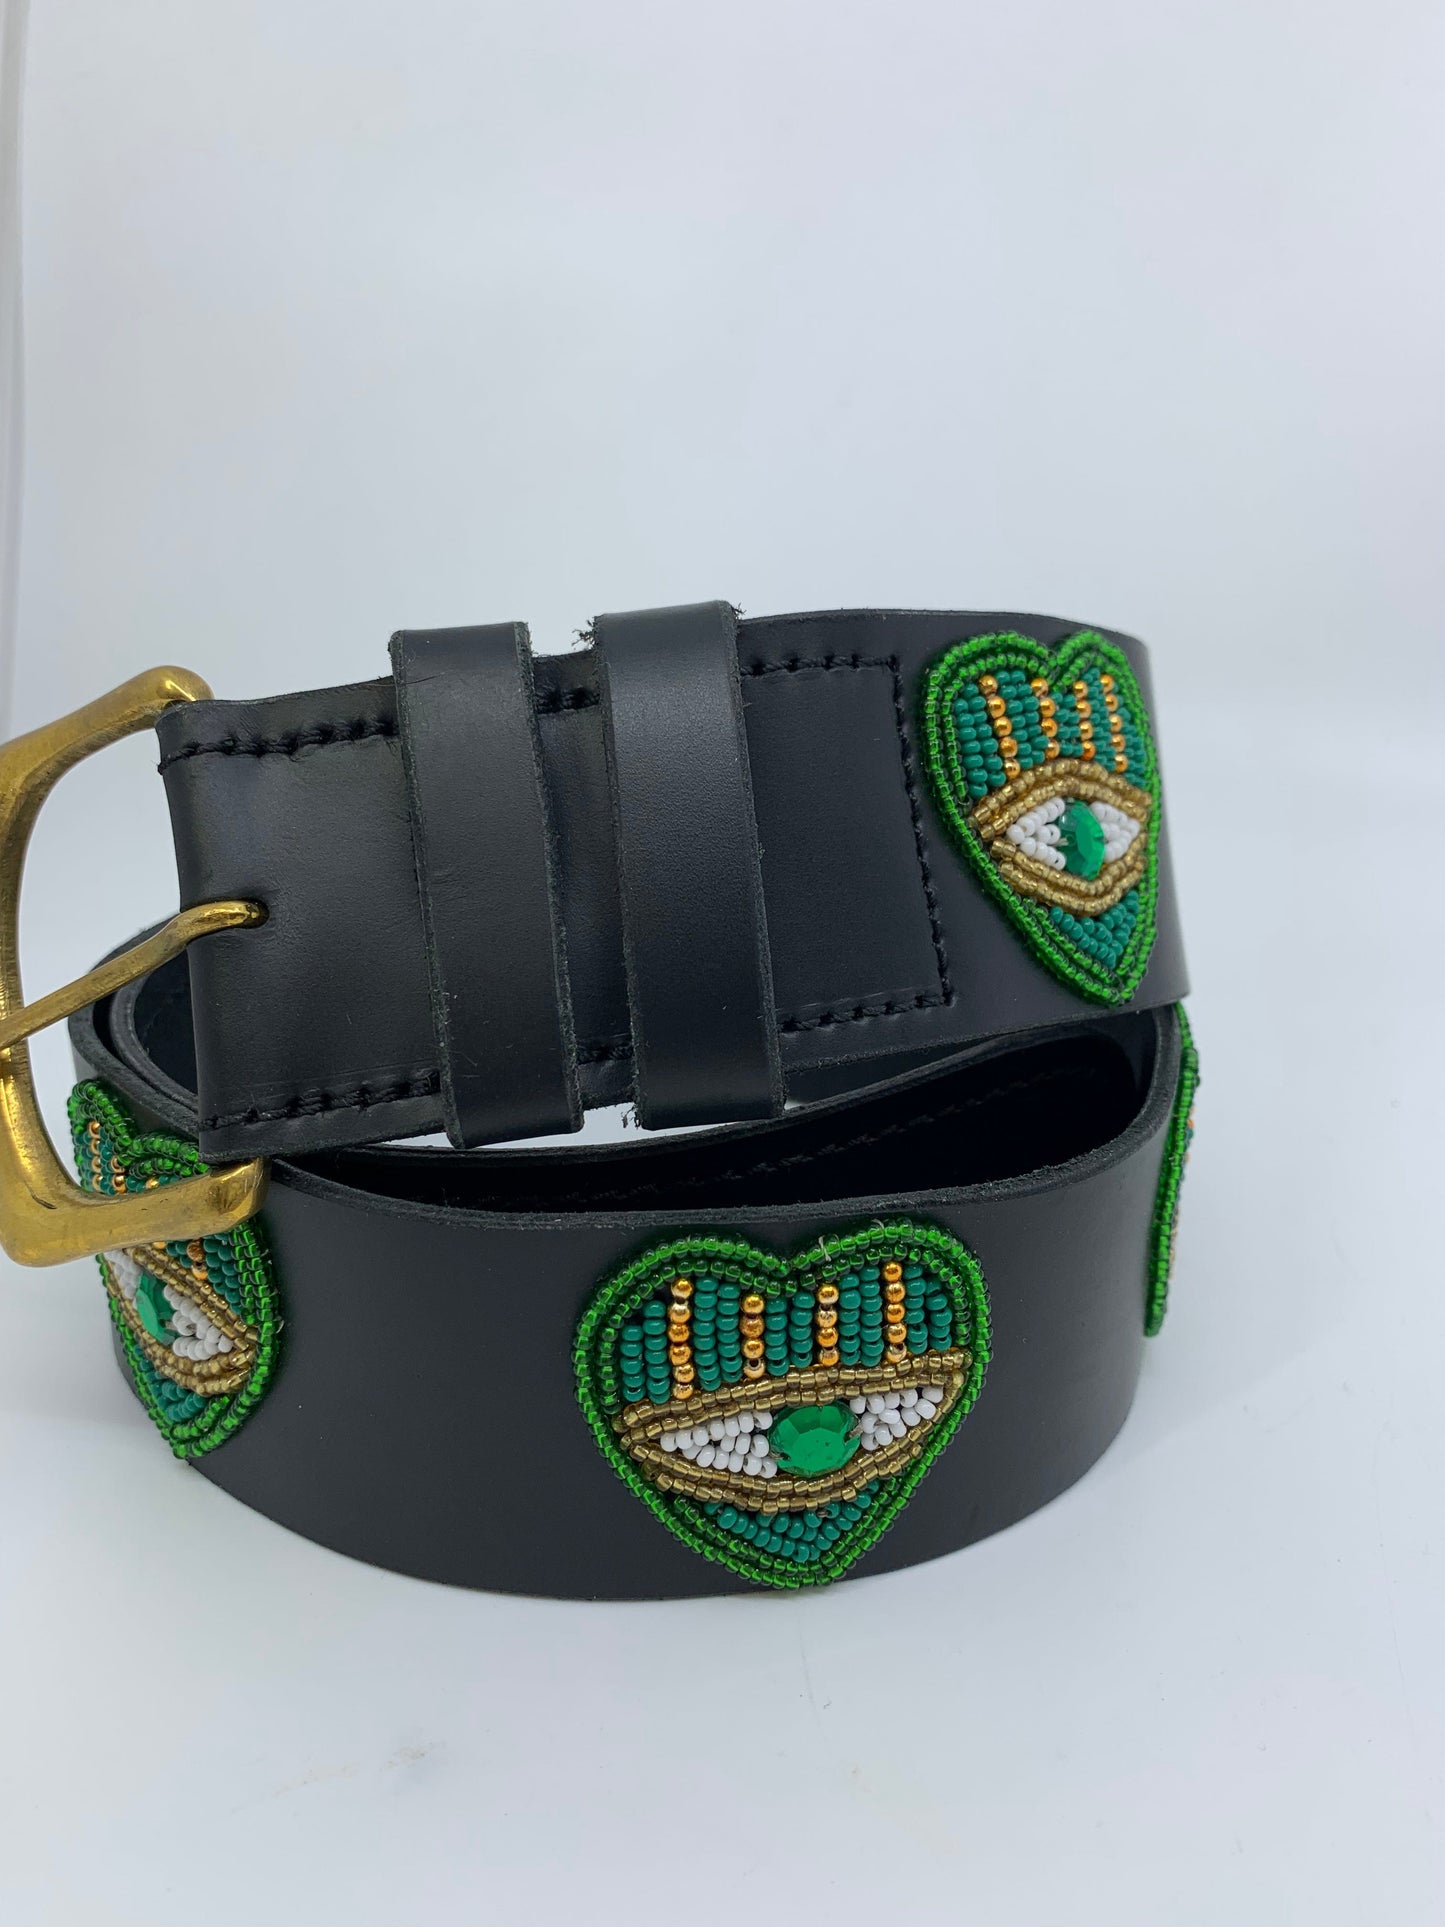 Zinj Designs Belt- 1.75" Beaded Assorted Designs pg.3 equestrian team apparel online tack store mobile tack store custom farm apparel custom show stable clothing equestrian lifestyle horse show clothing riding clothes horses equestrian tack store